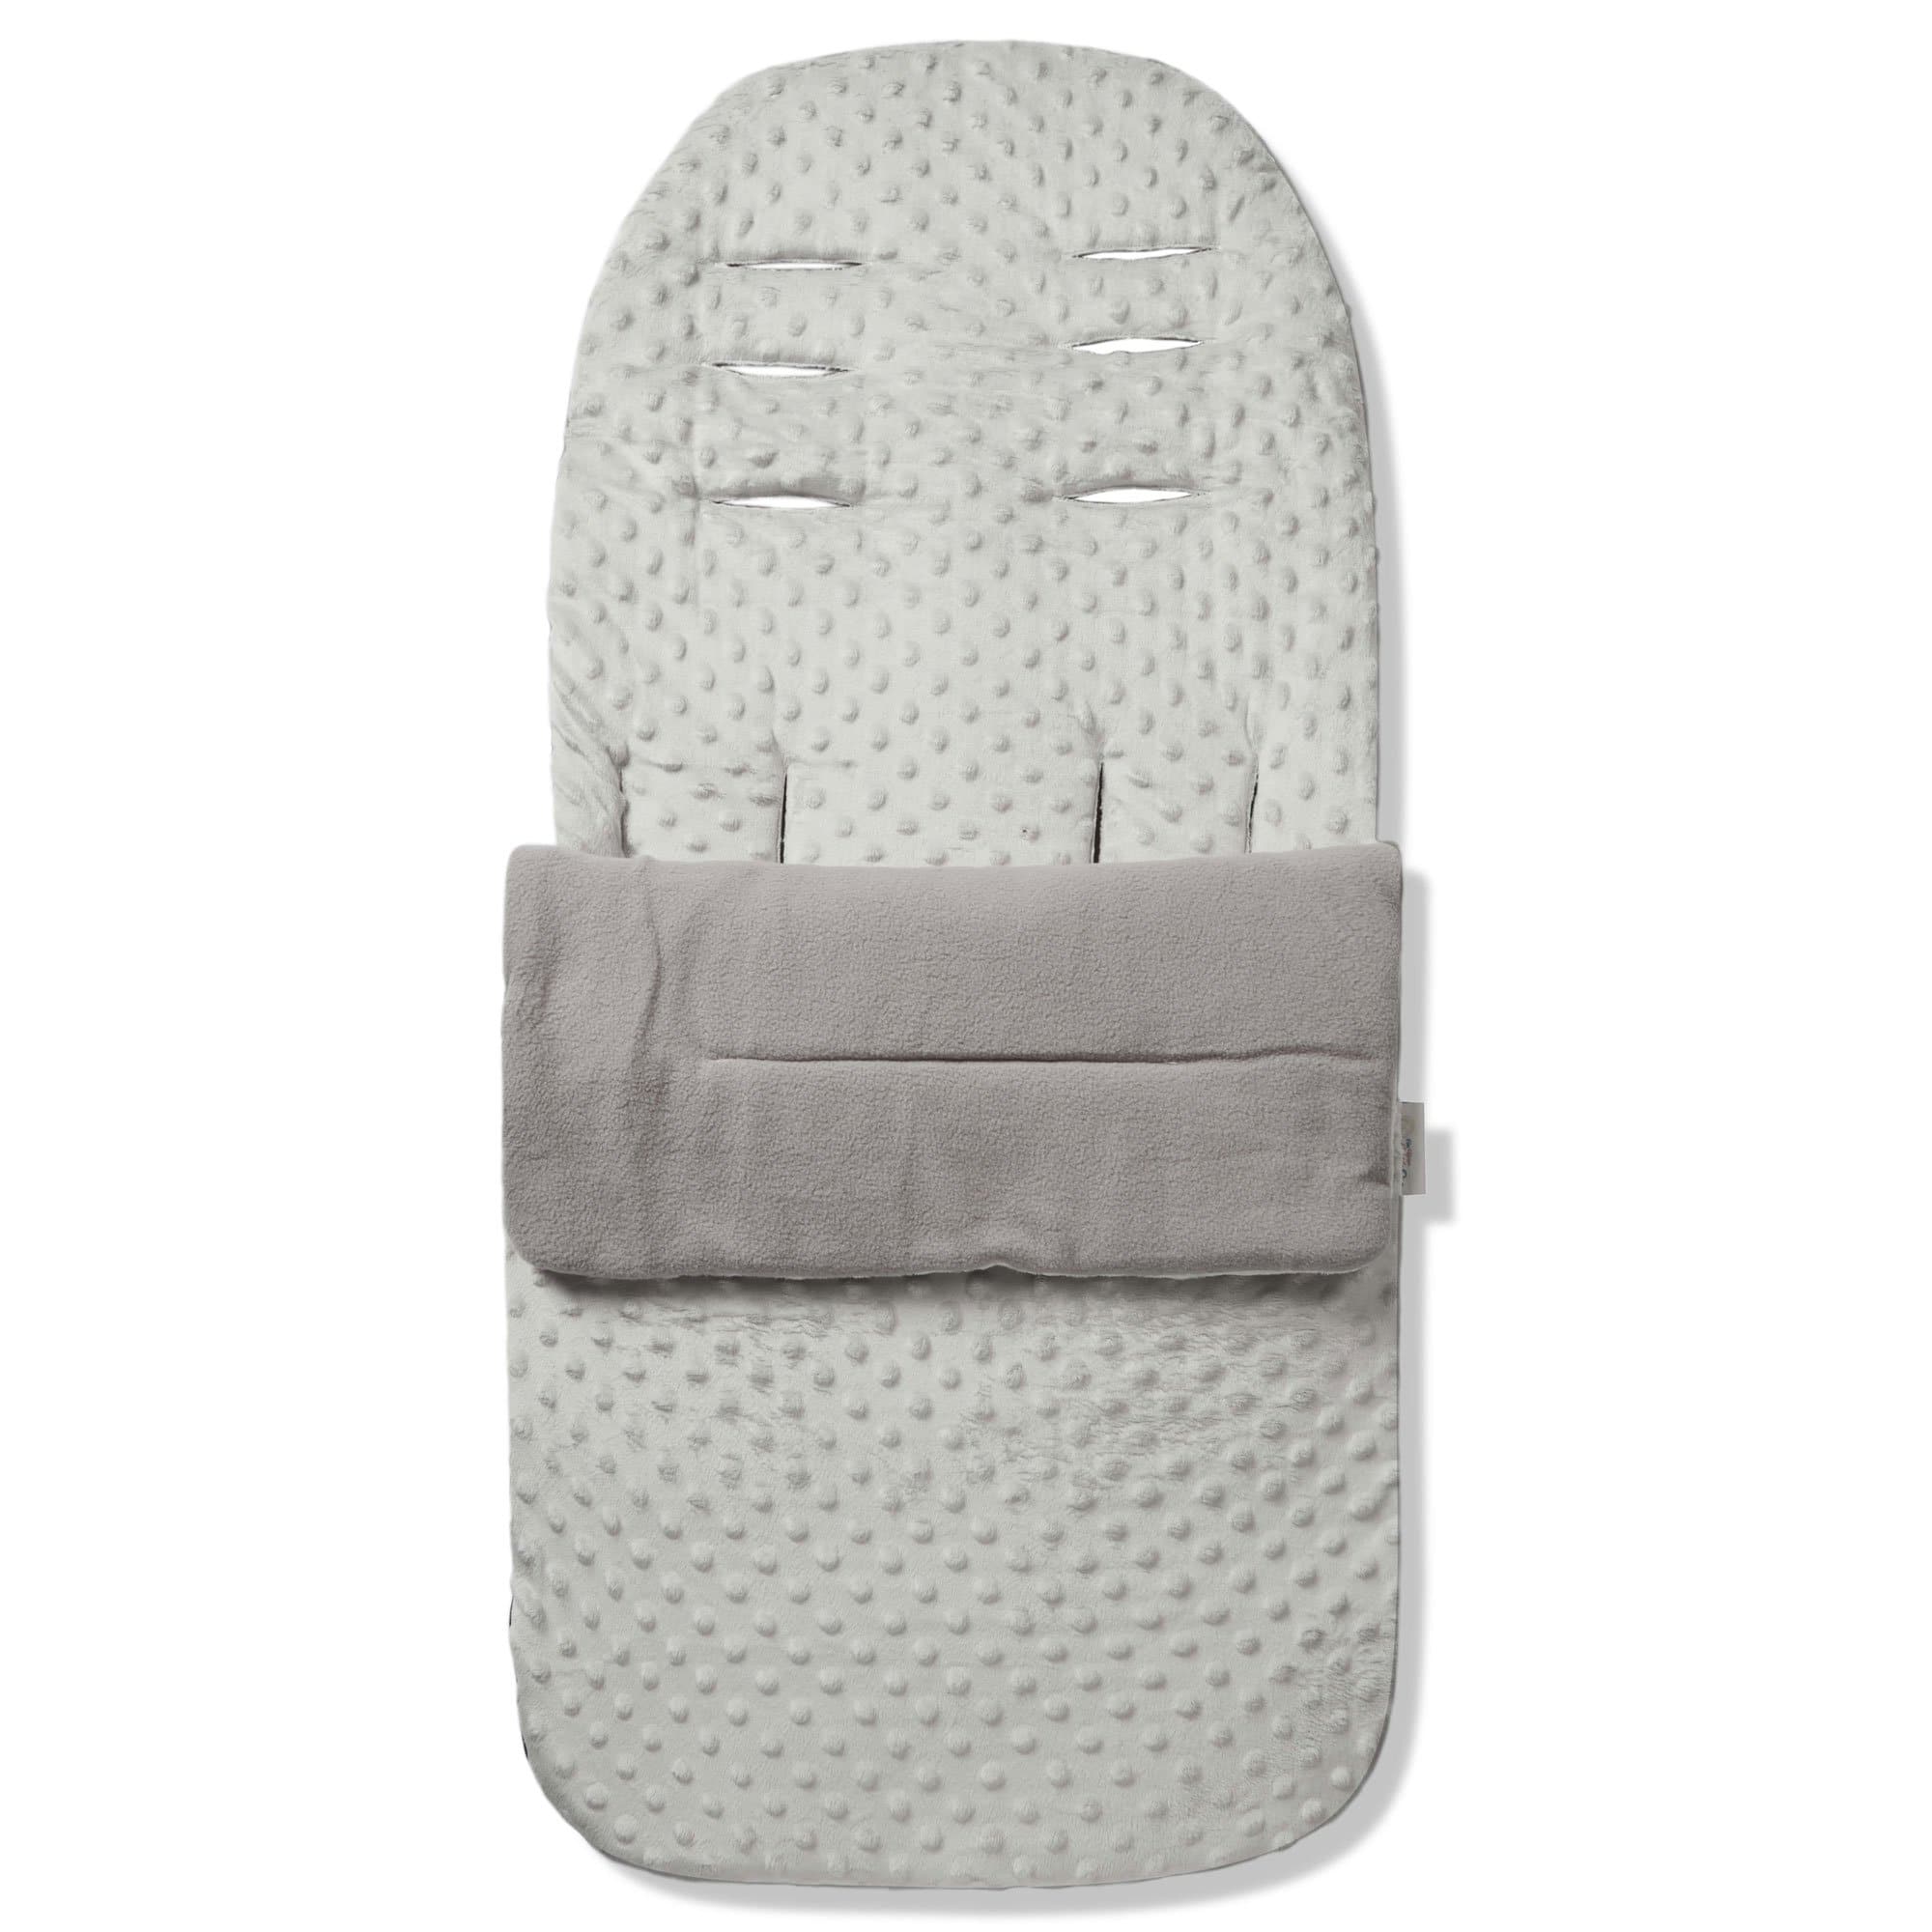 Dimple Footmuff / Cosy Toes Compatible with Kiddicouture - Grey / Fits All Models | For Your Little One